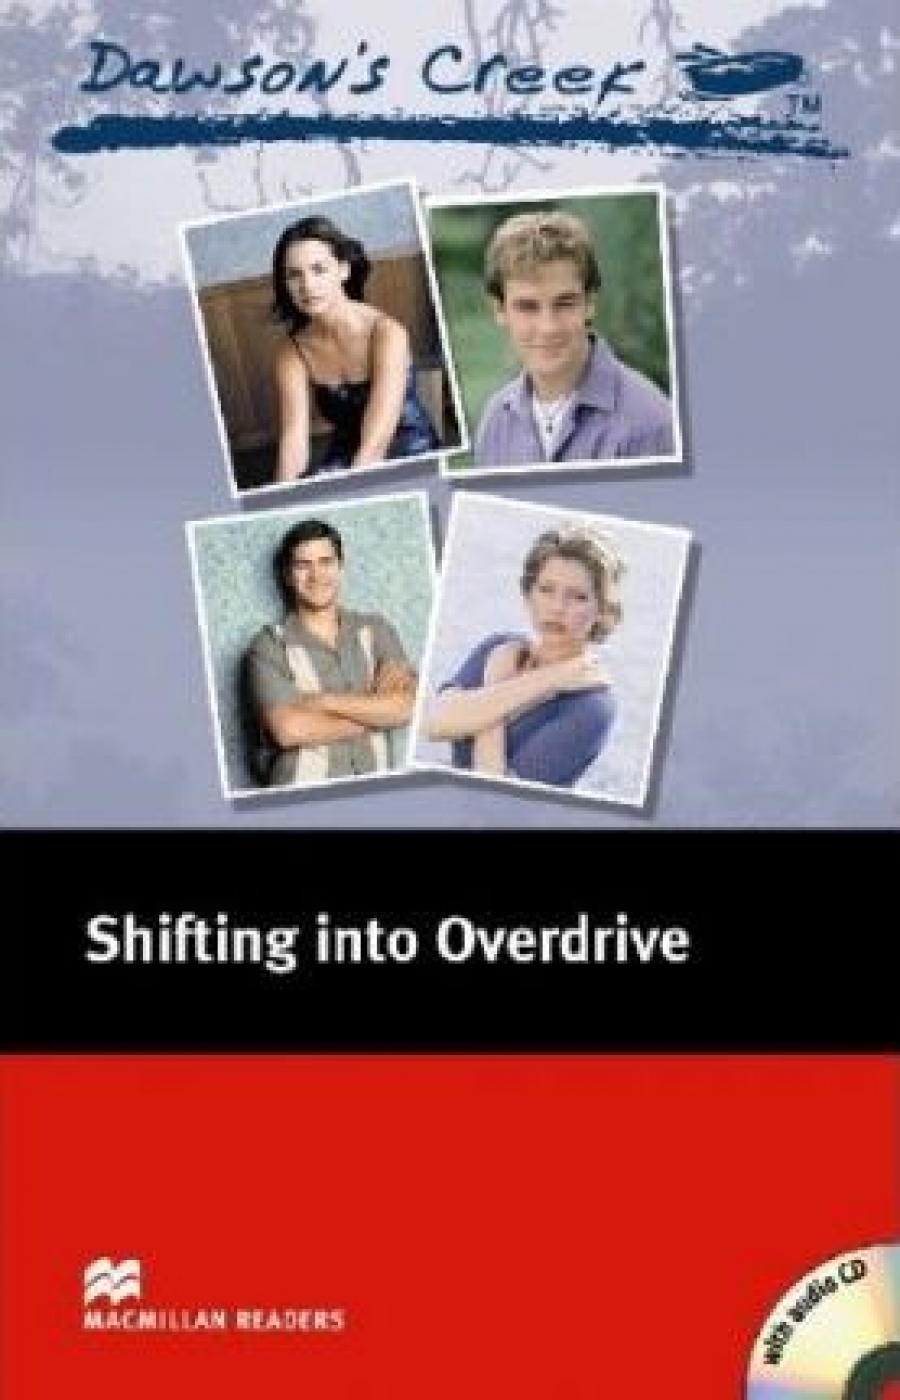 C.J. Anders and F. H. Cornish Dawson's Creek 4: Shifting into Overdrive (with Audio CD) 